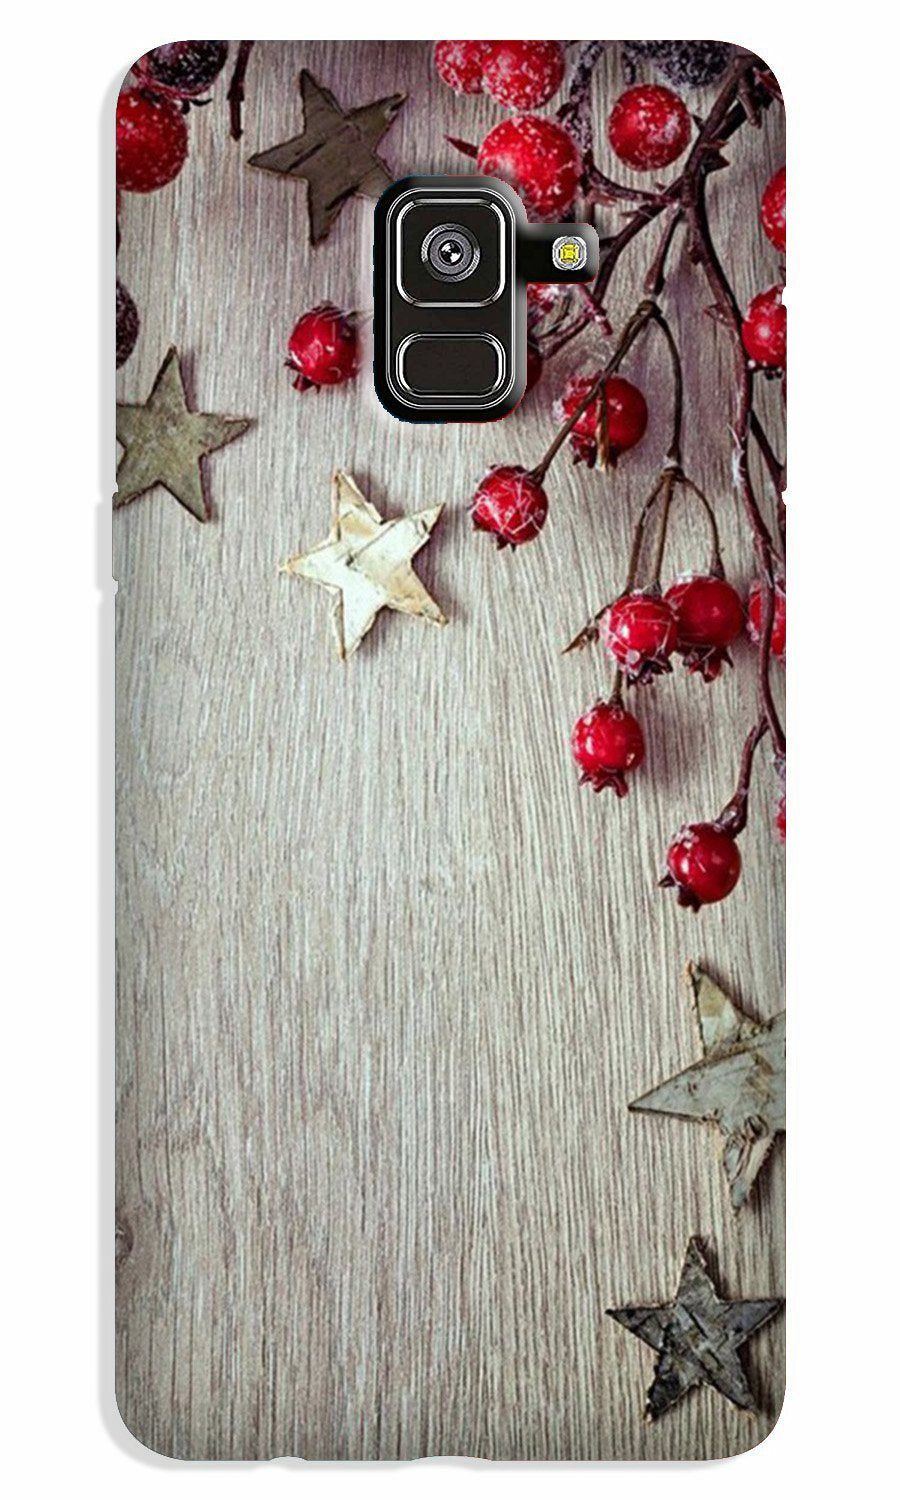 Stars Case for Galaxy A8 Plus